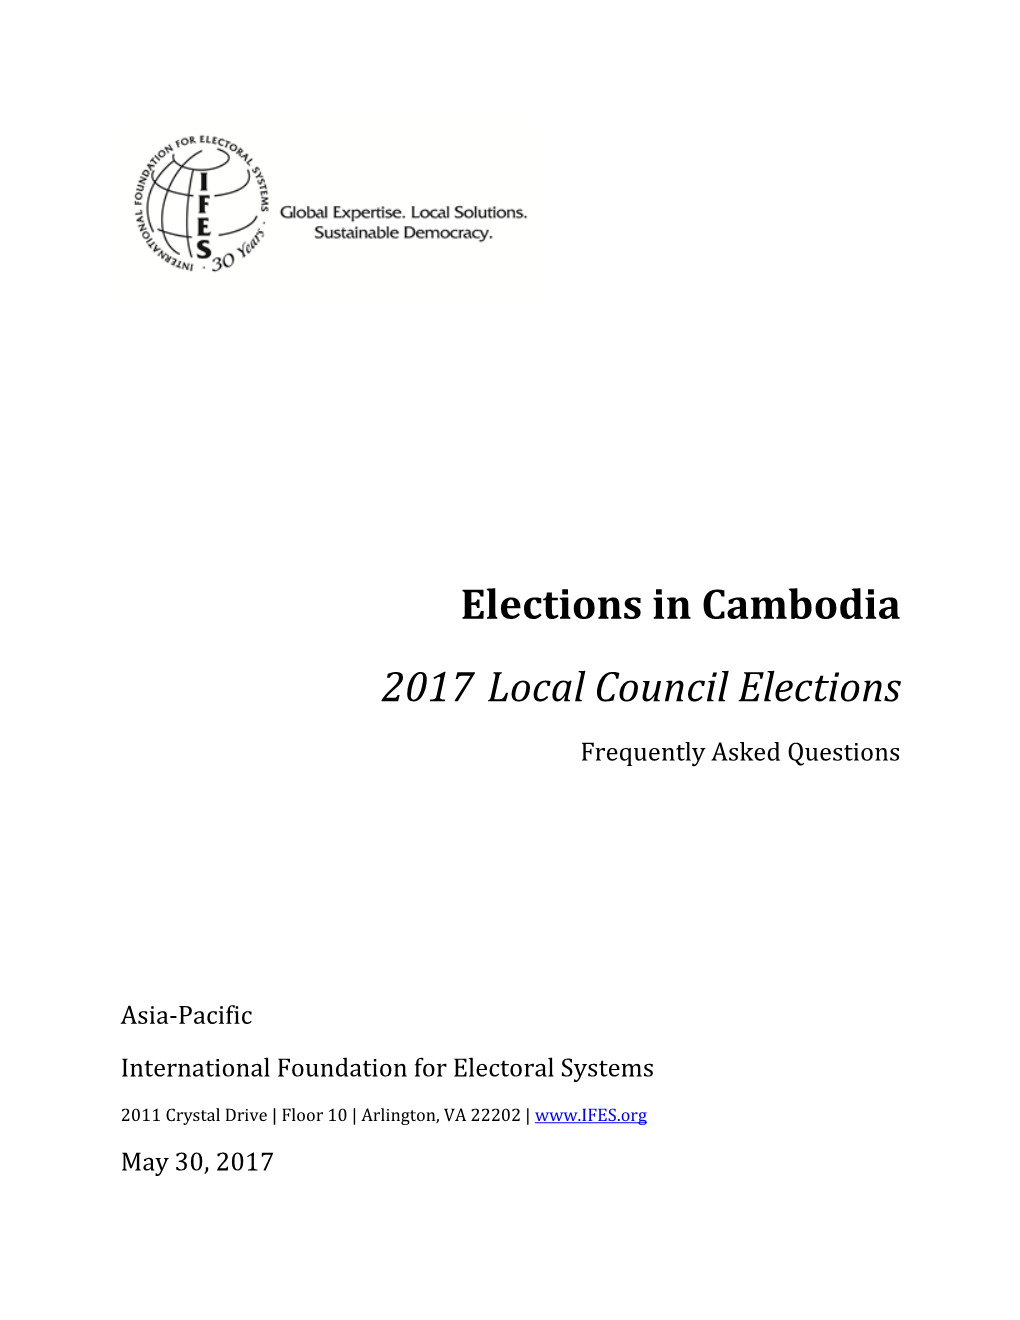 Elections in Cambodia: 2017 Local Council Elections Frequently Asked Questions